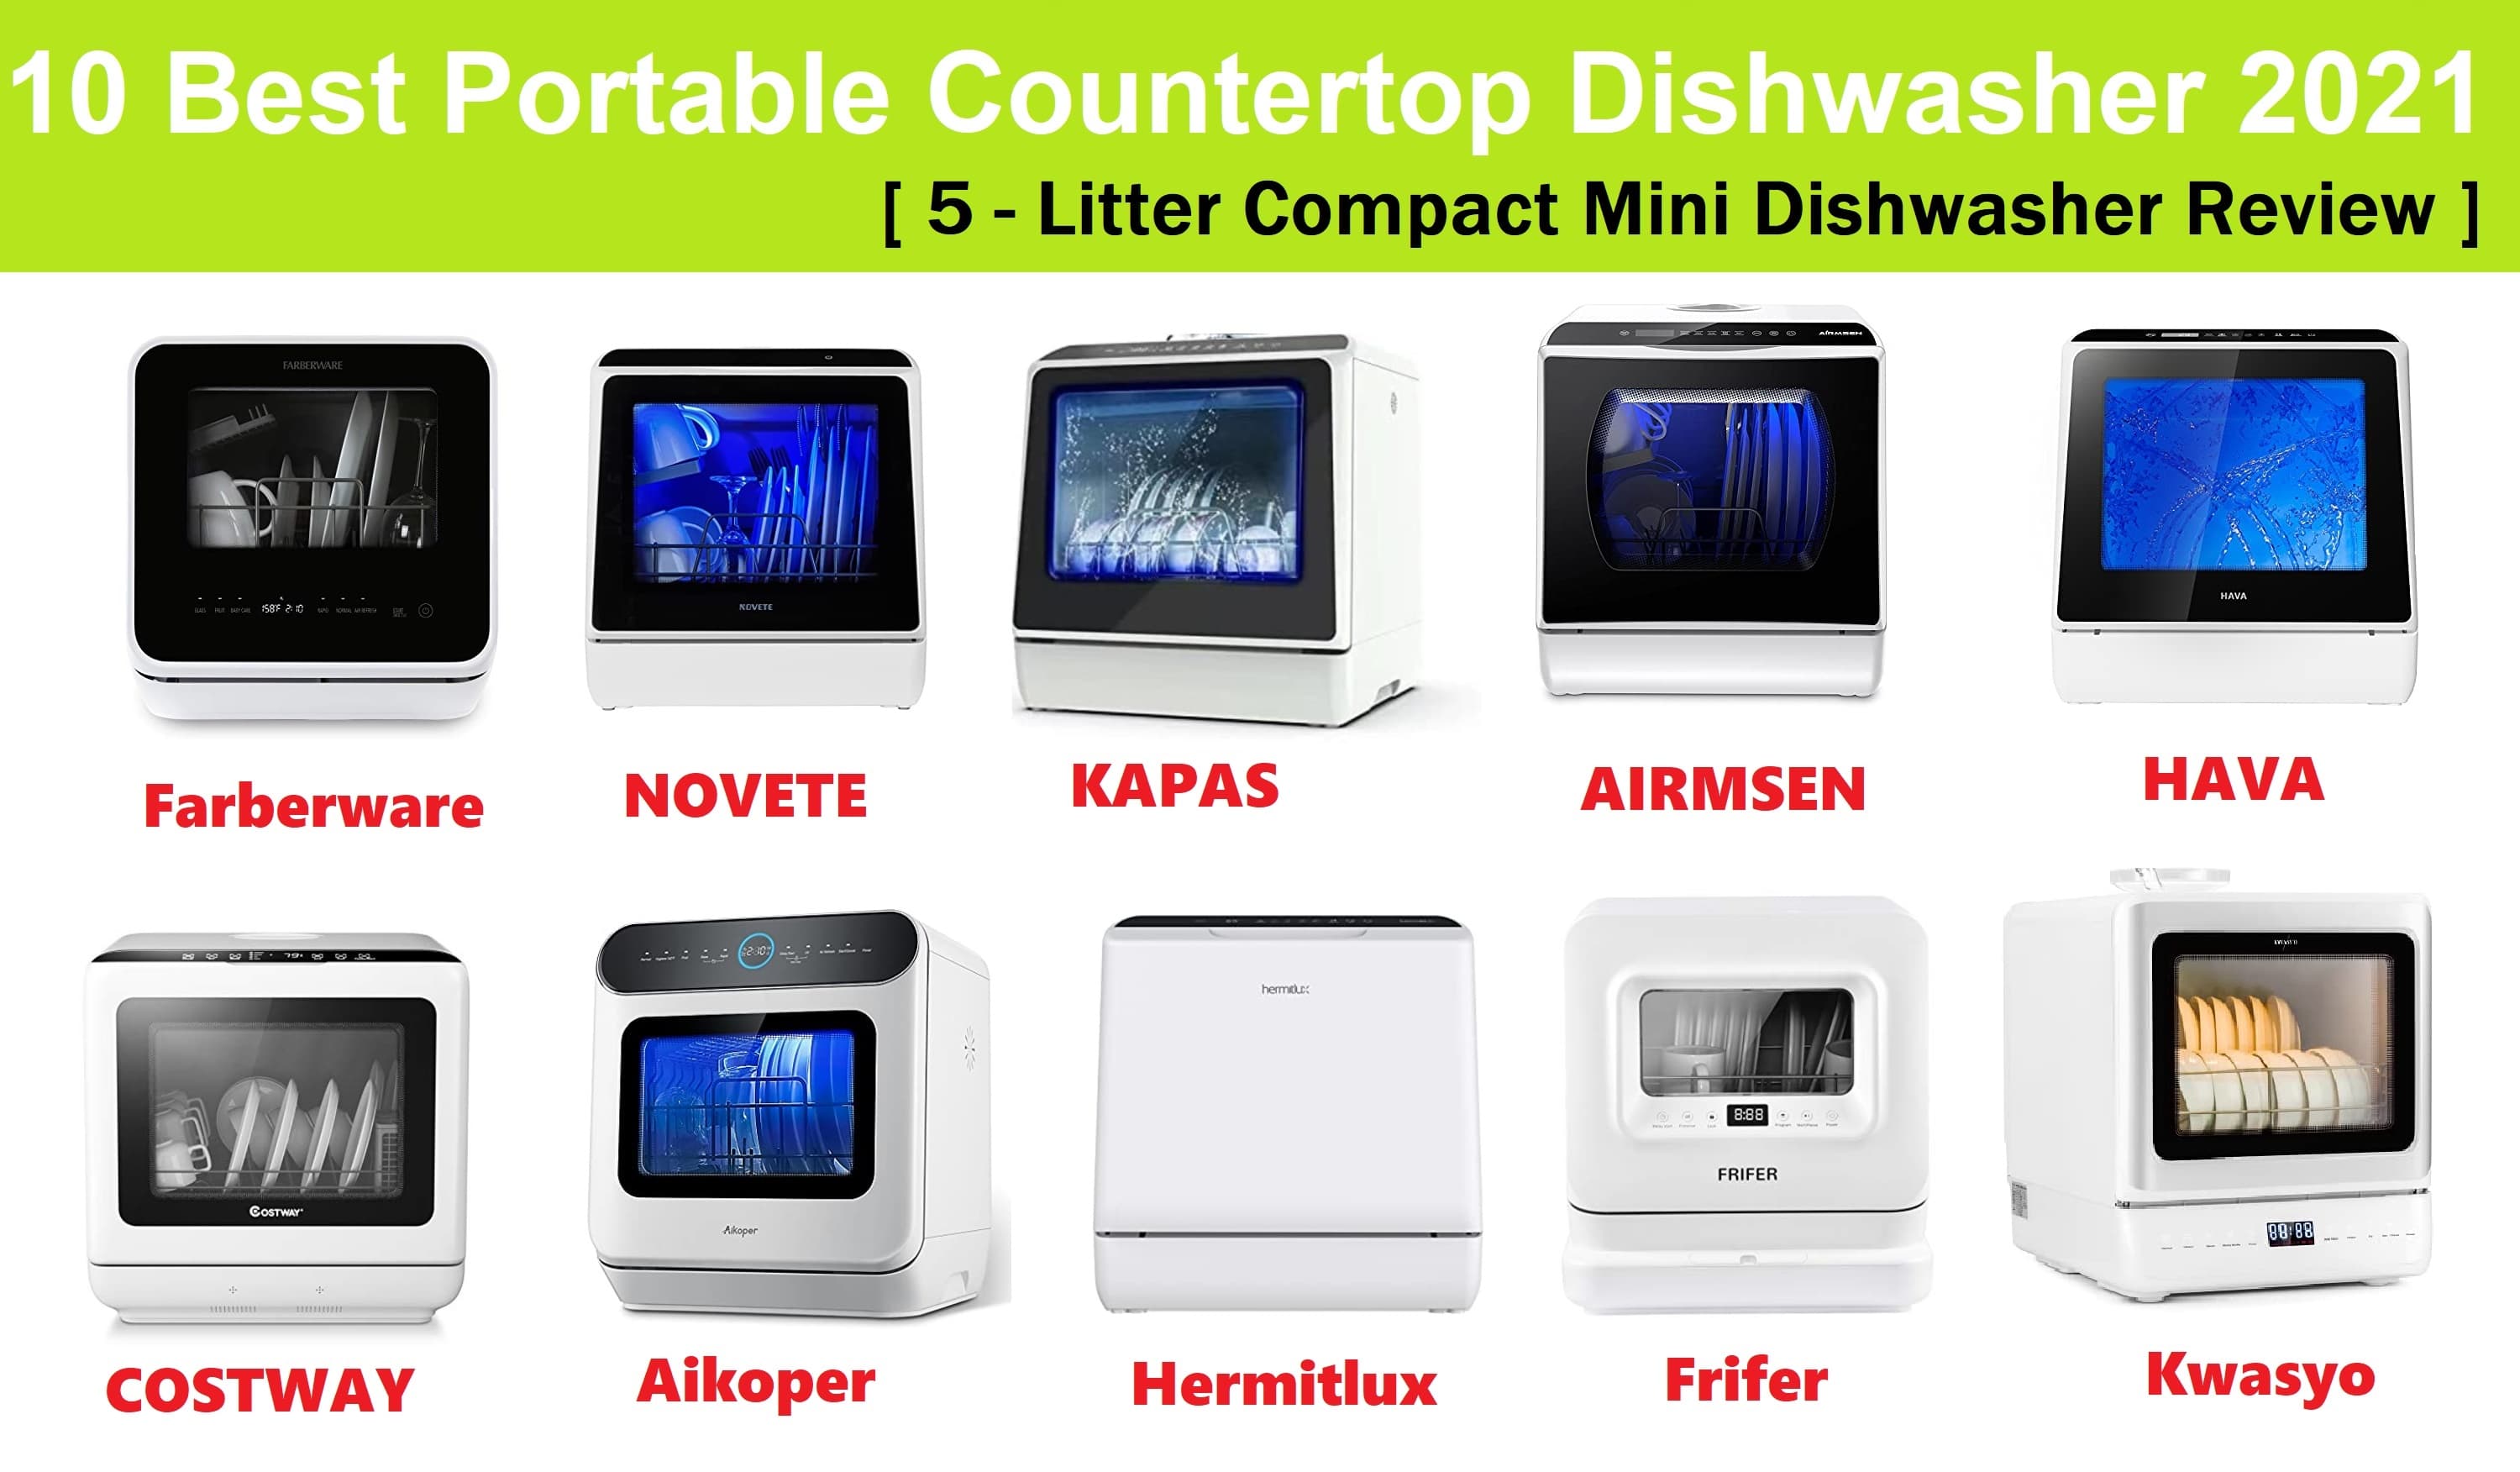 10 Best Portable Countertop Dishwasher 2022 Review: 5- Litter Compact Mini Dishwasher